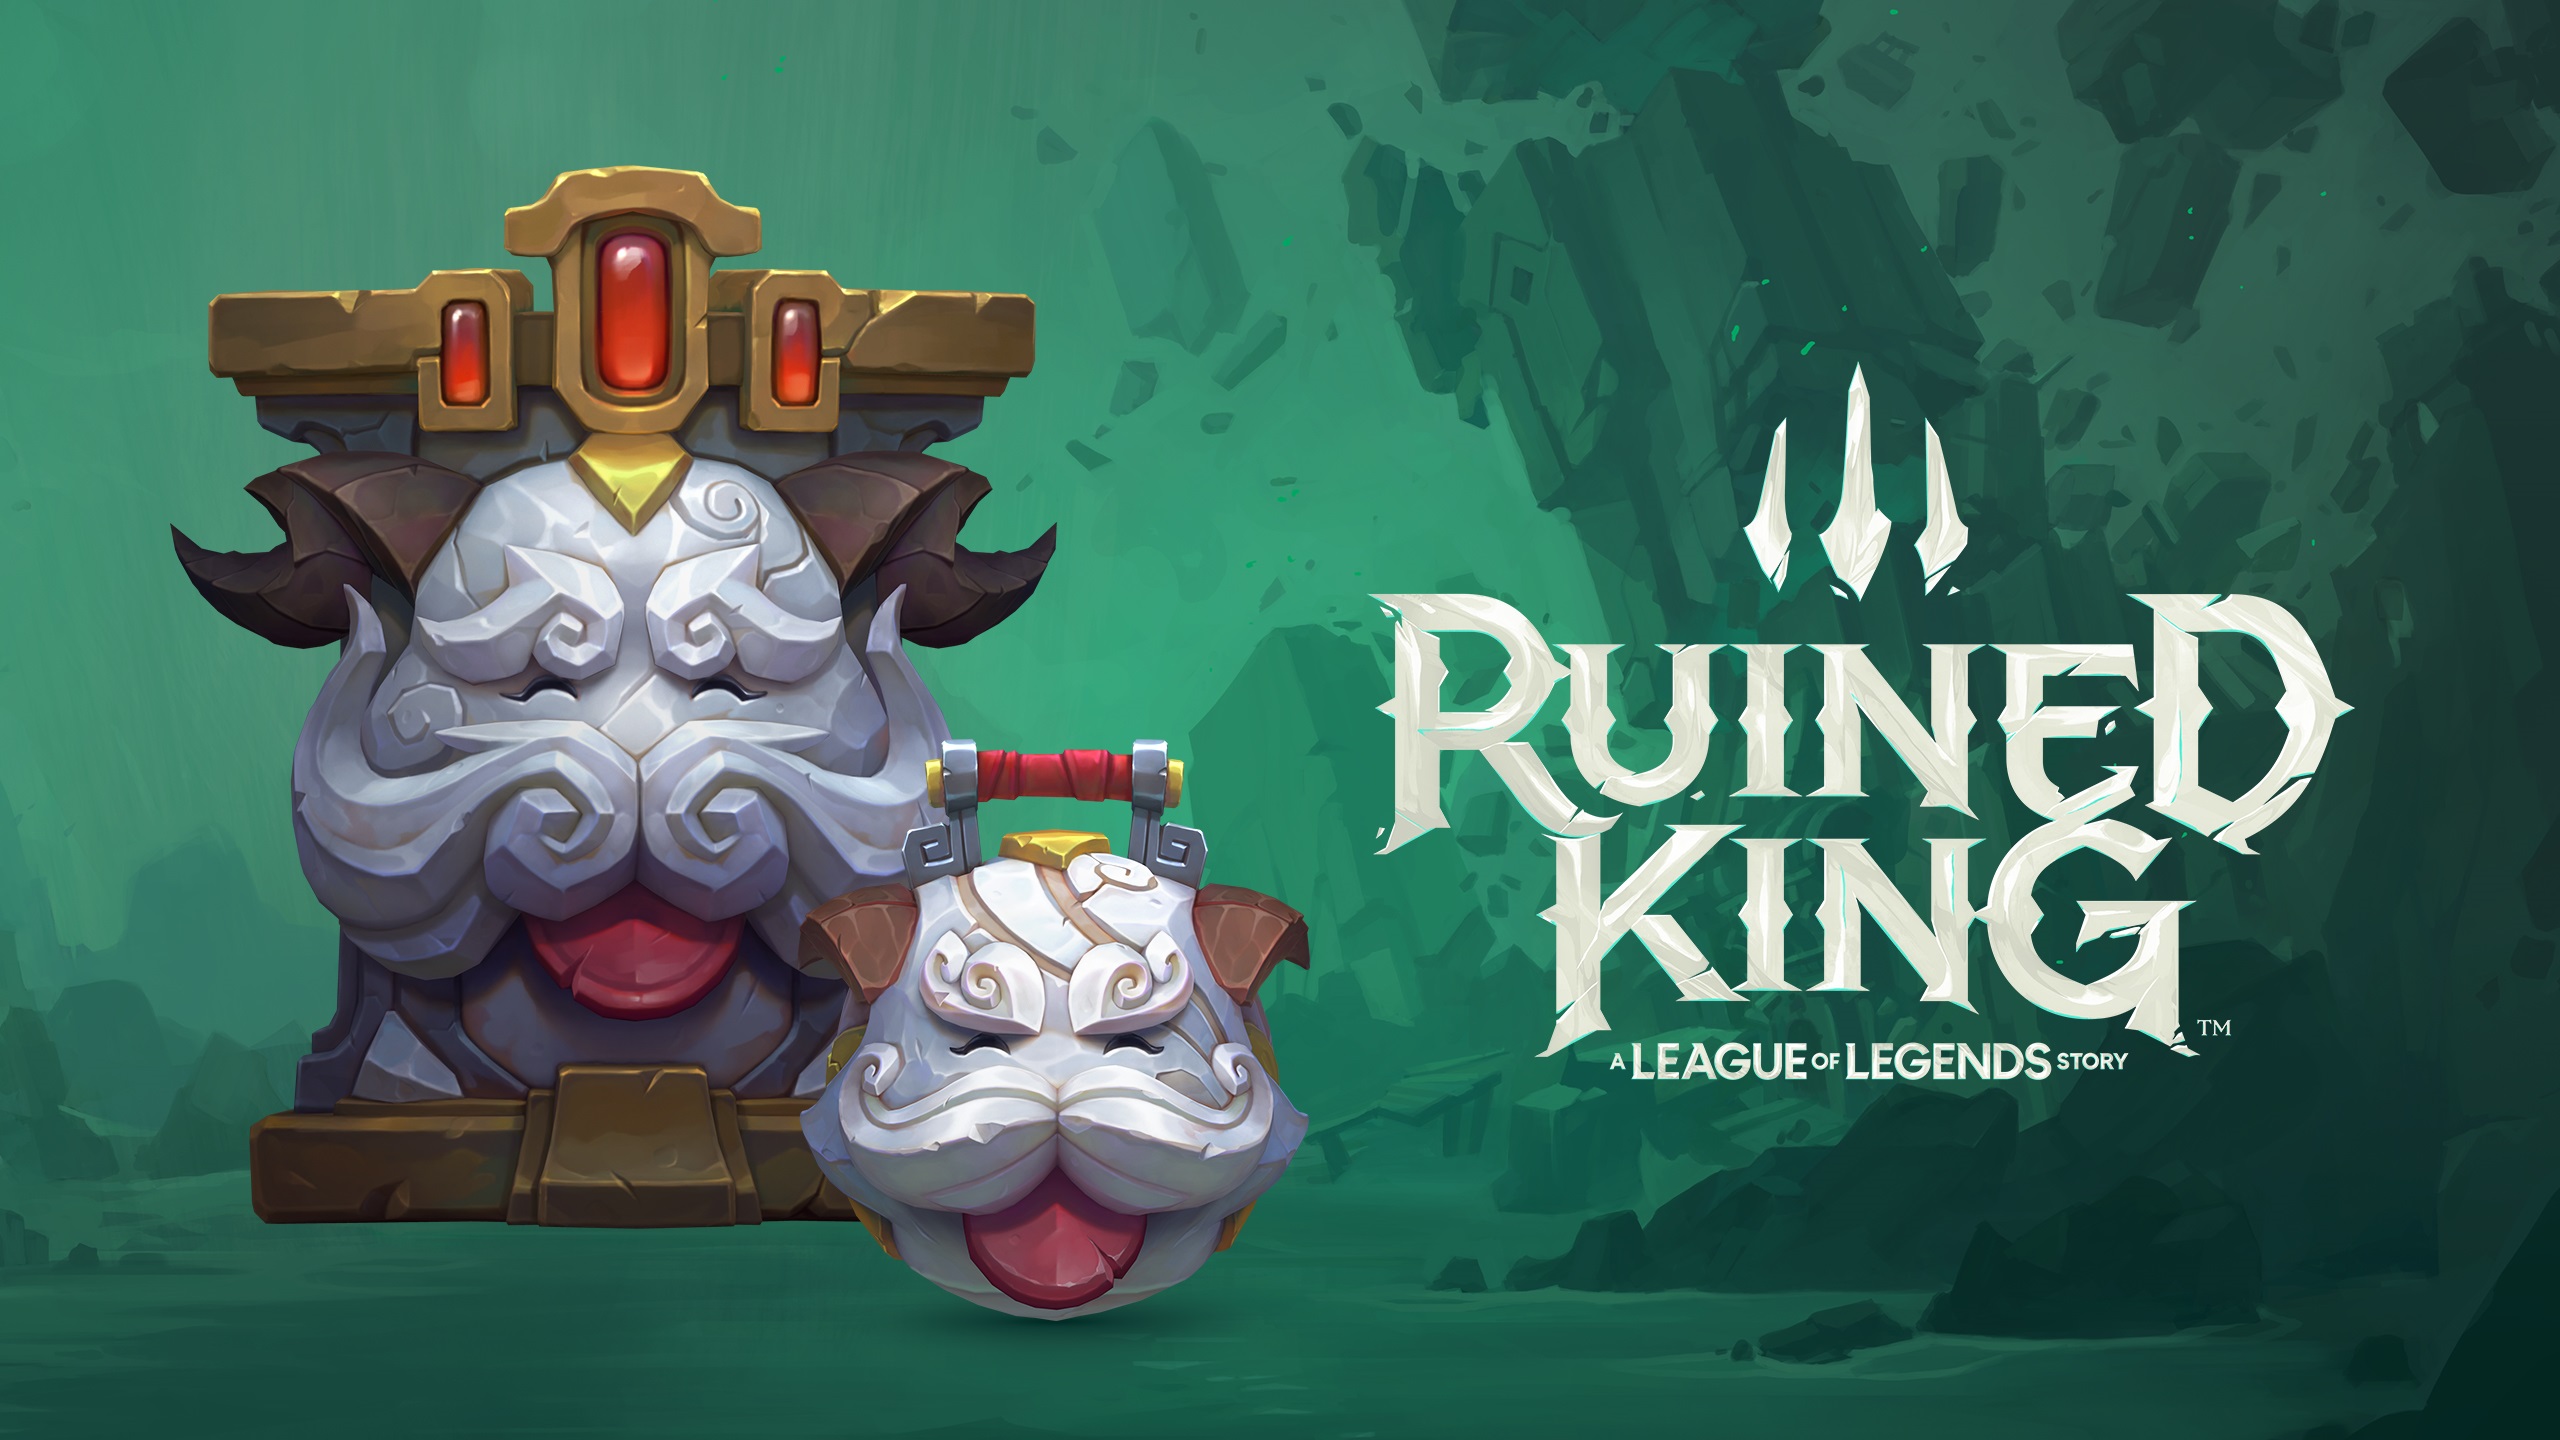 Video Game Ruined King A League Of Legends Story 2560x1440